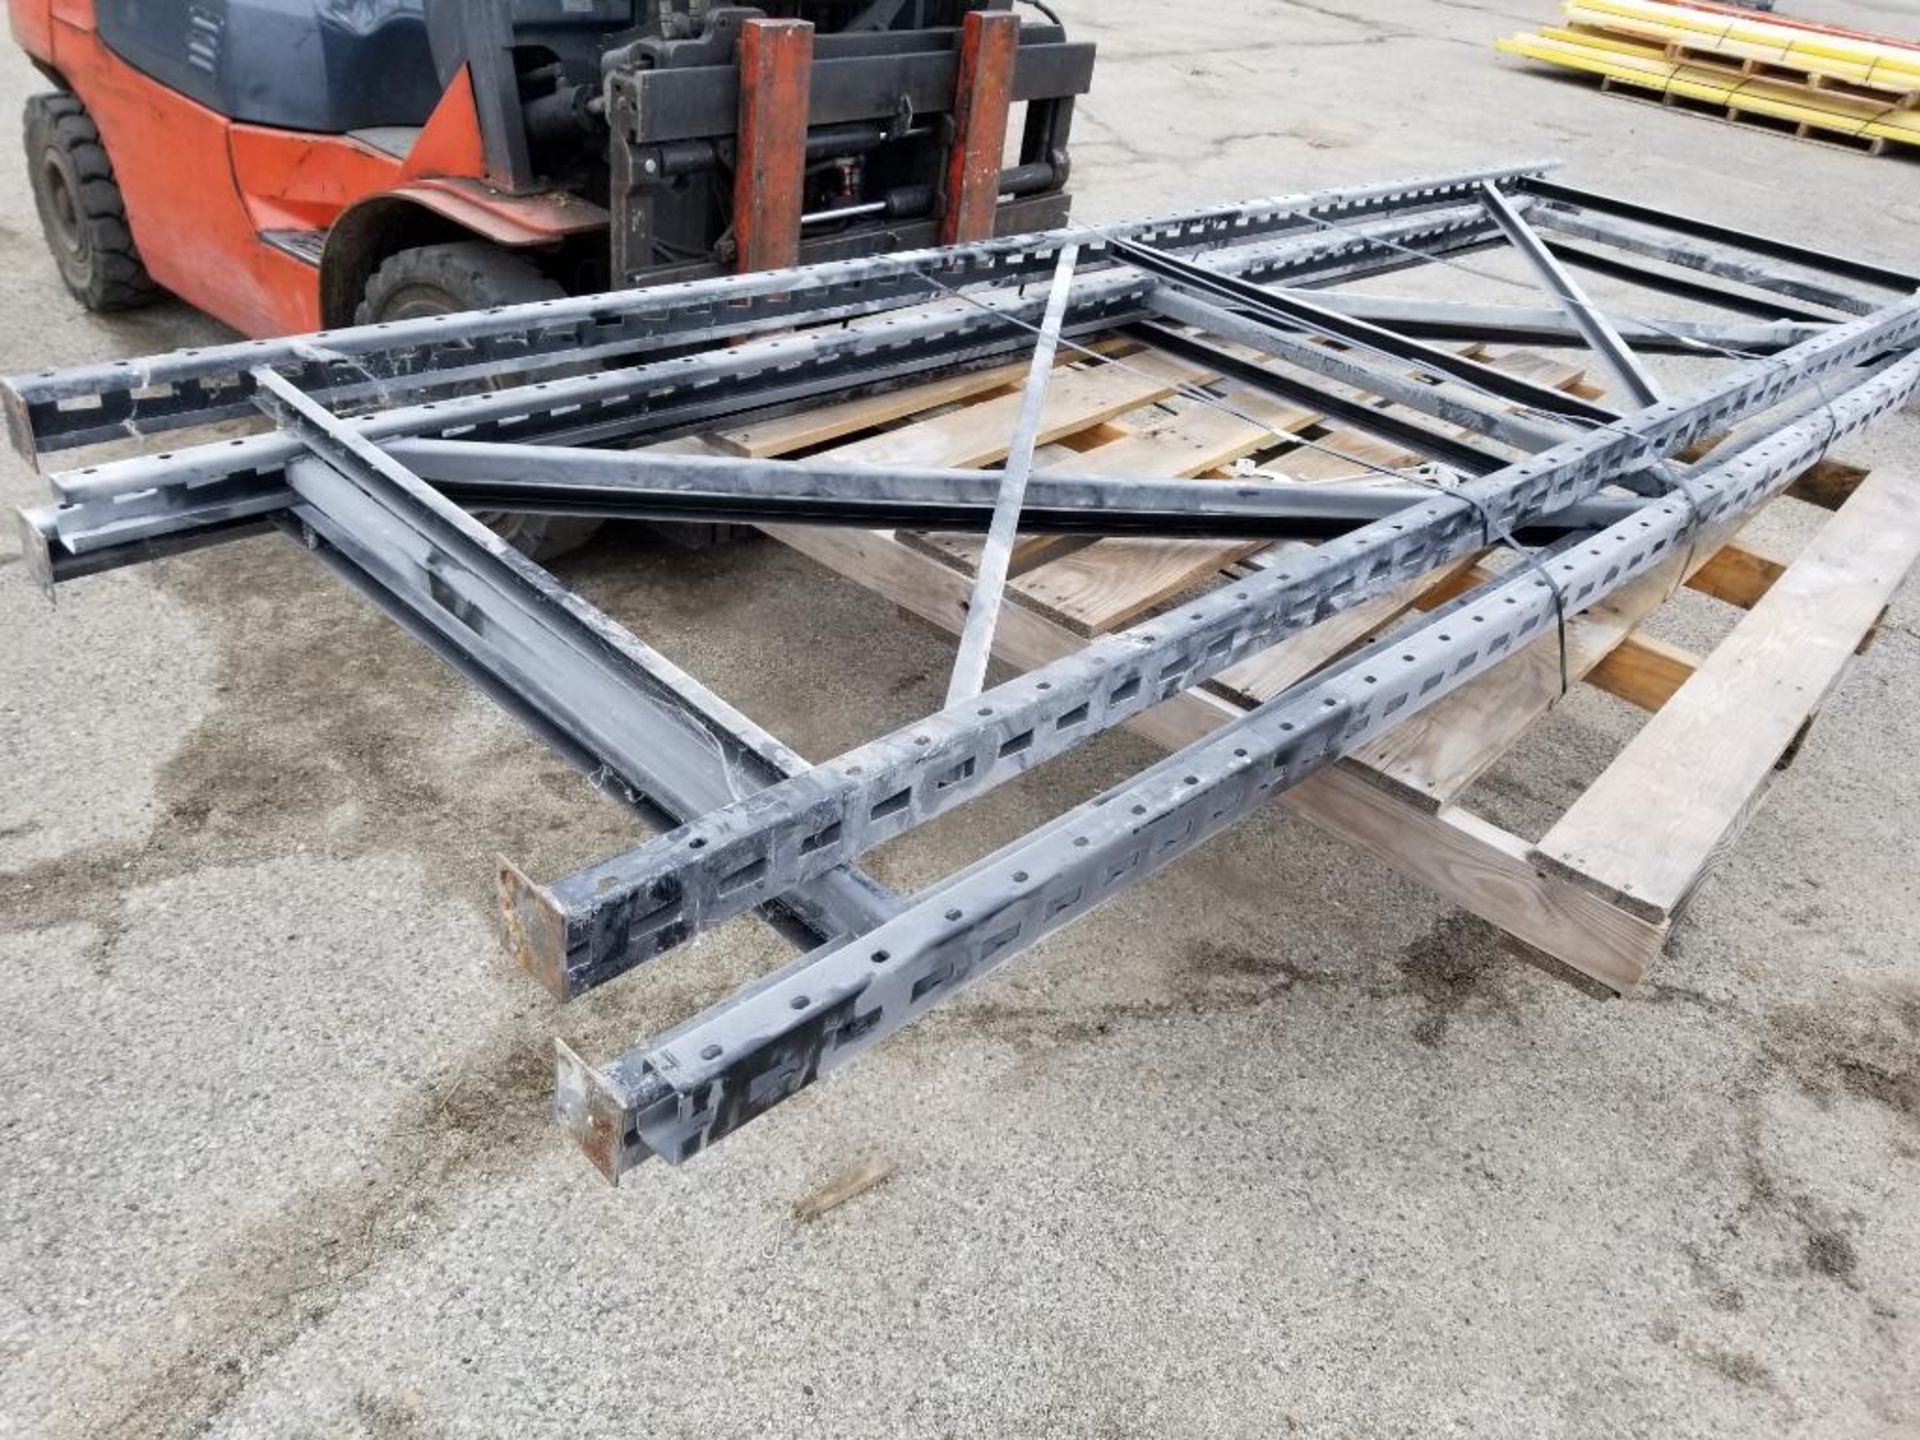 Qty 3 - Pallet racking uprights. 144in tall x 42in wide. - Image 5 of 6